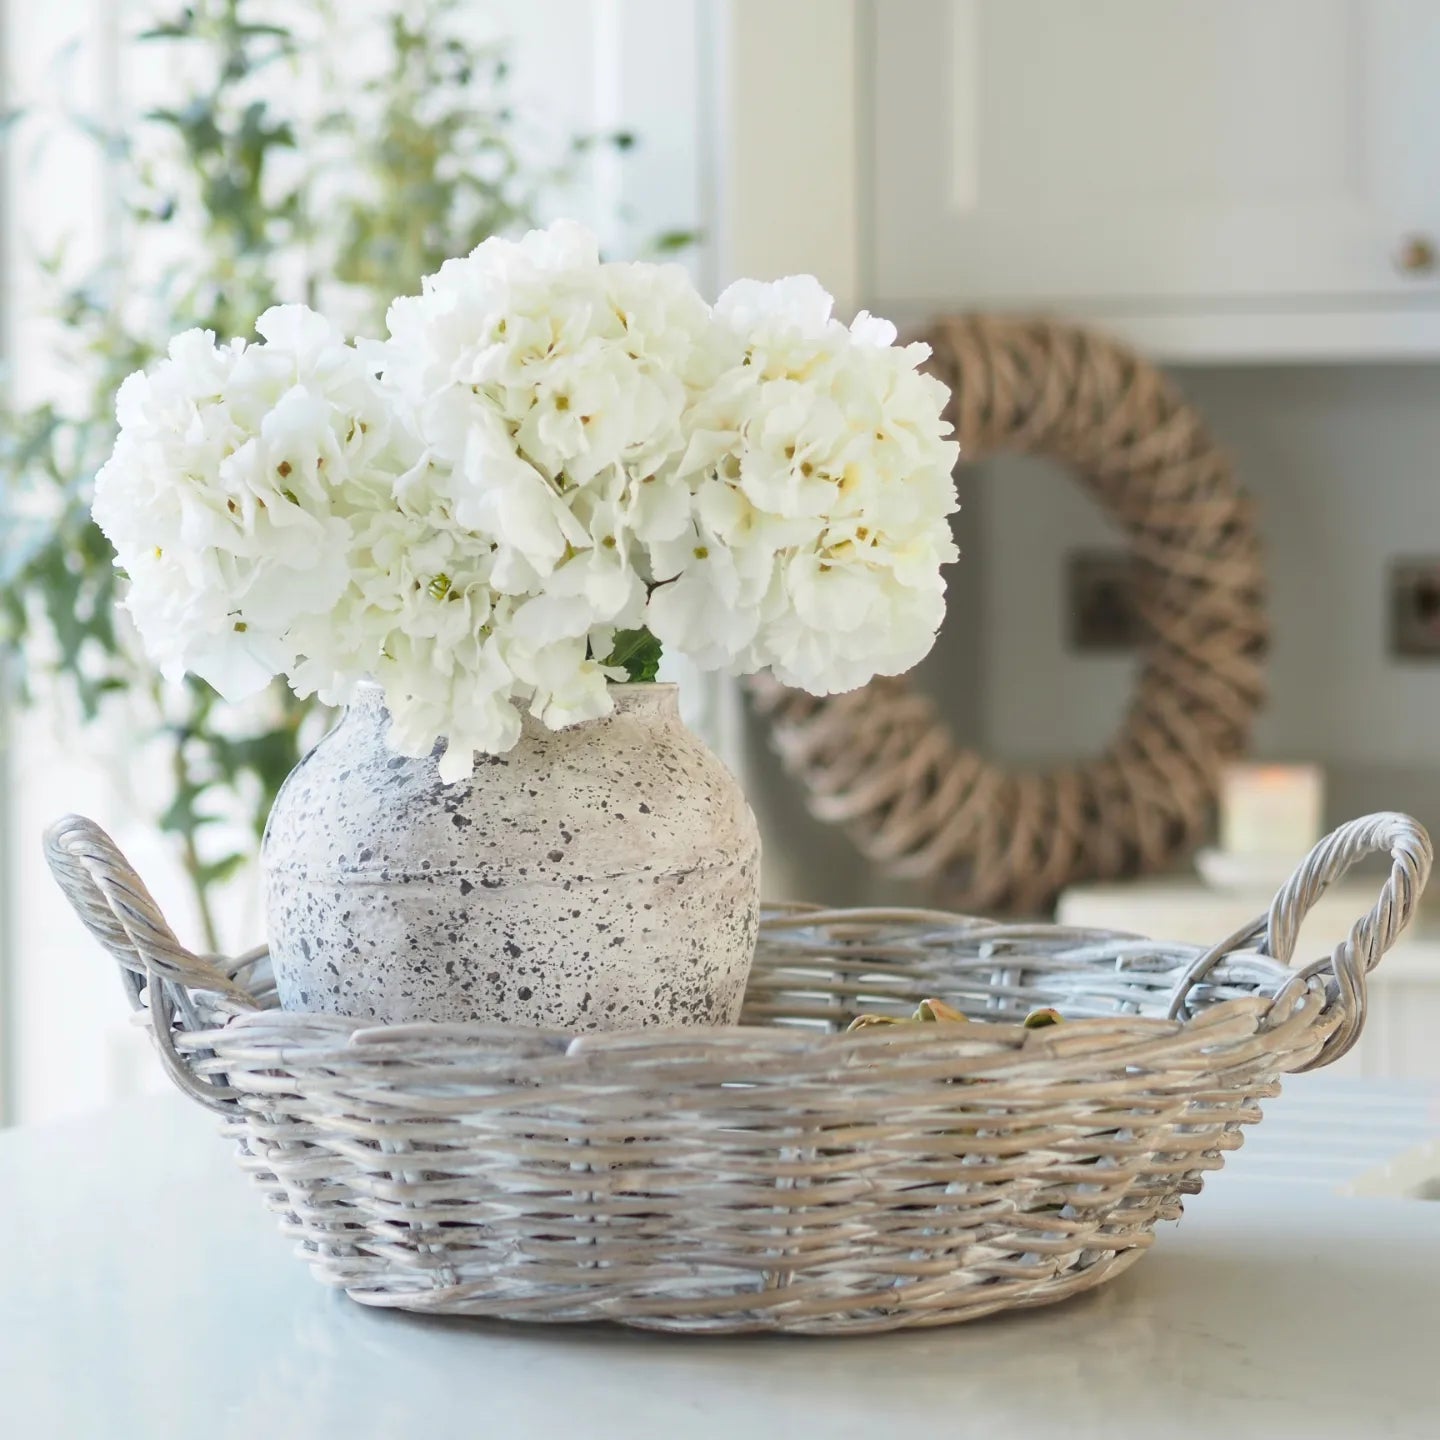 4 Ways To Transition Your Space From Winter To Spring On A Budget